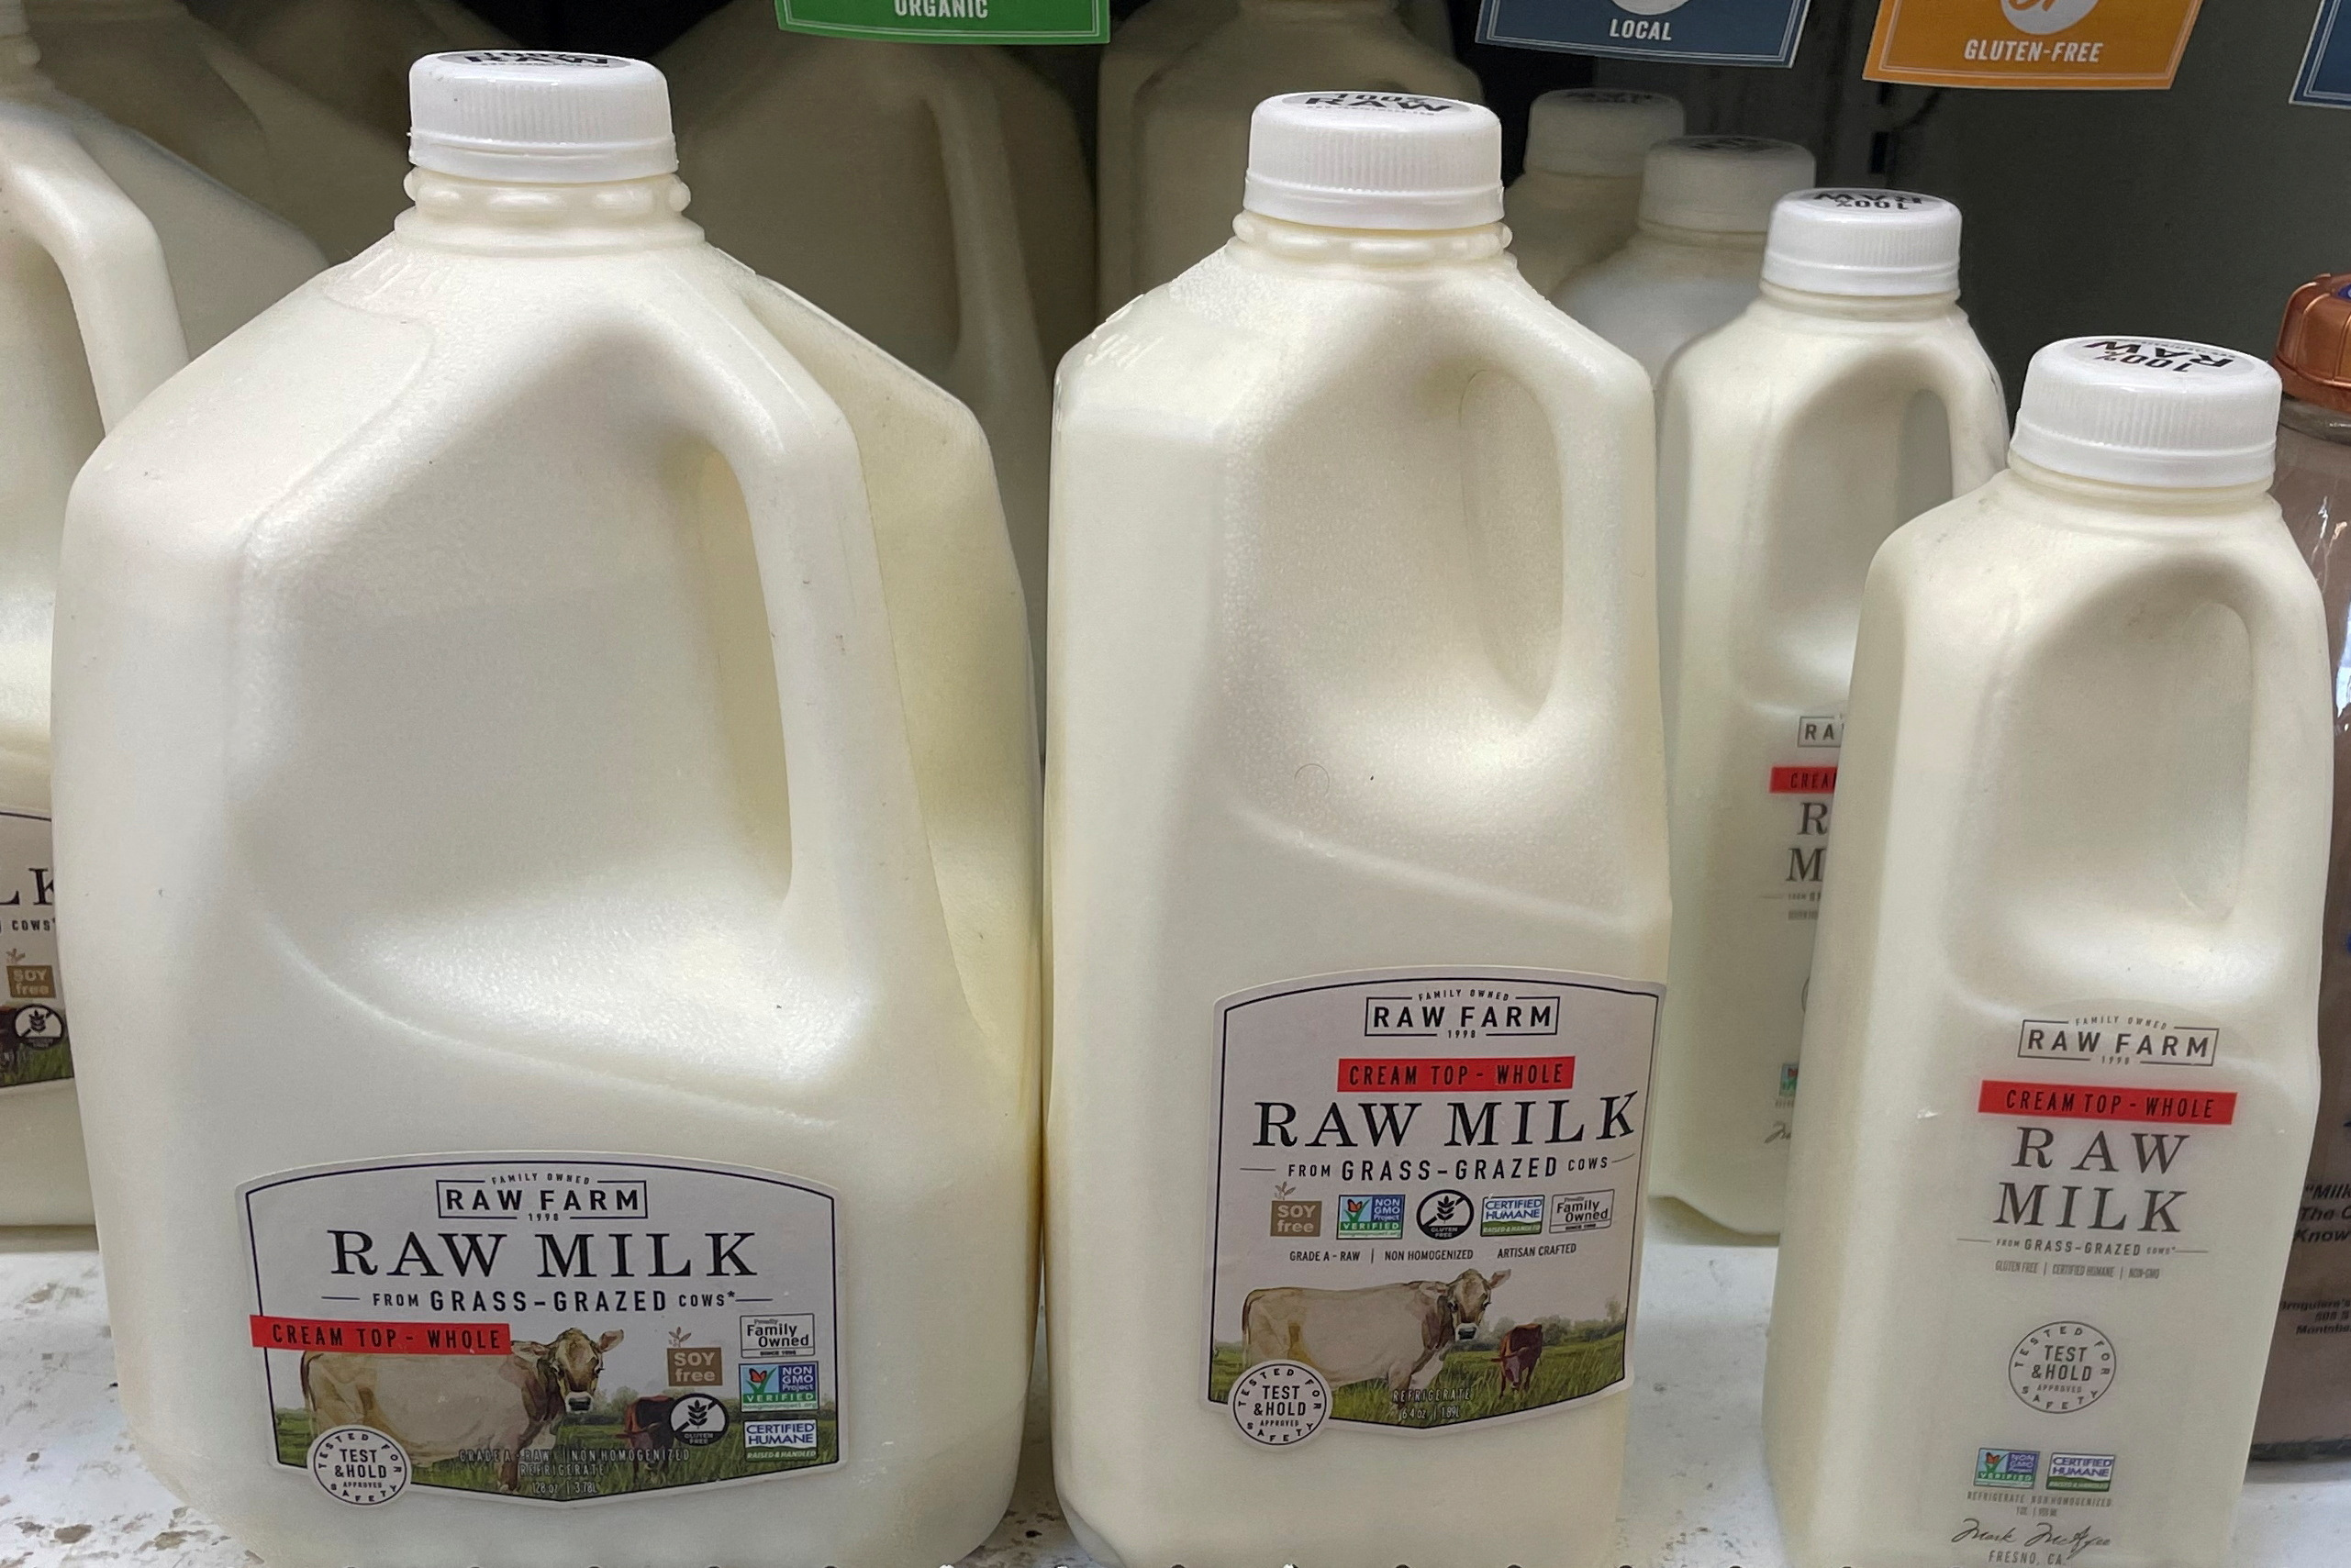 Bottles of raw milk are seen in a display in a Sprouts Farmers Market store in Los Angeles